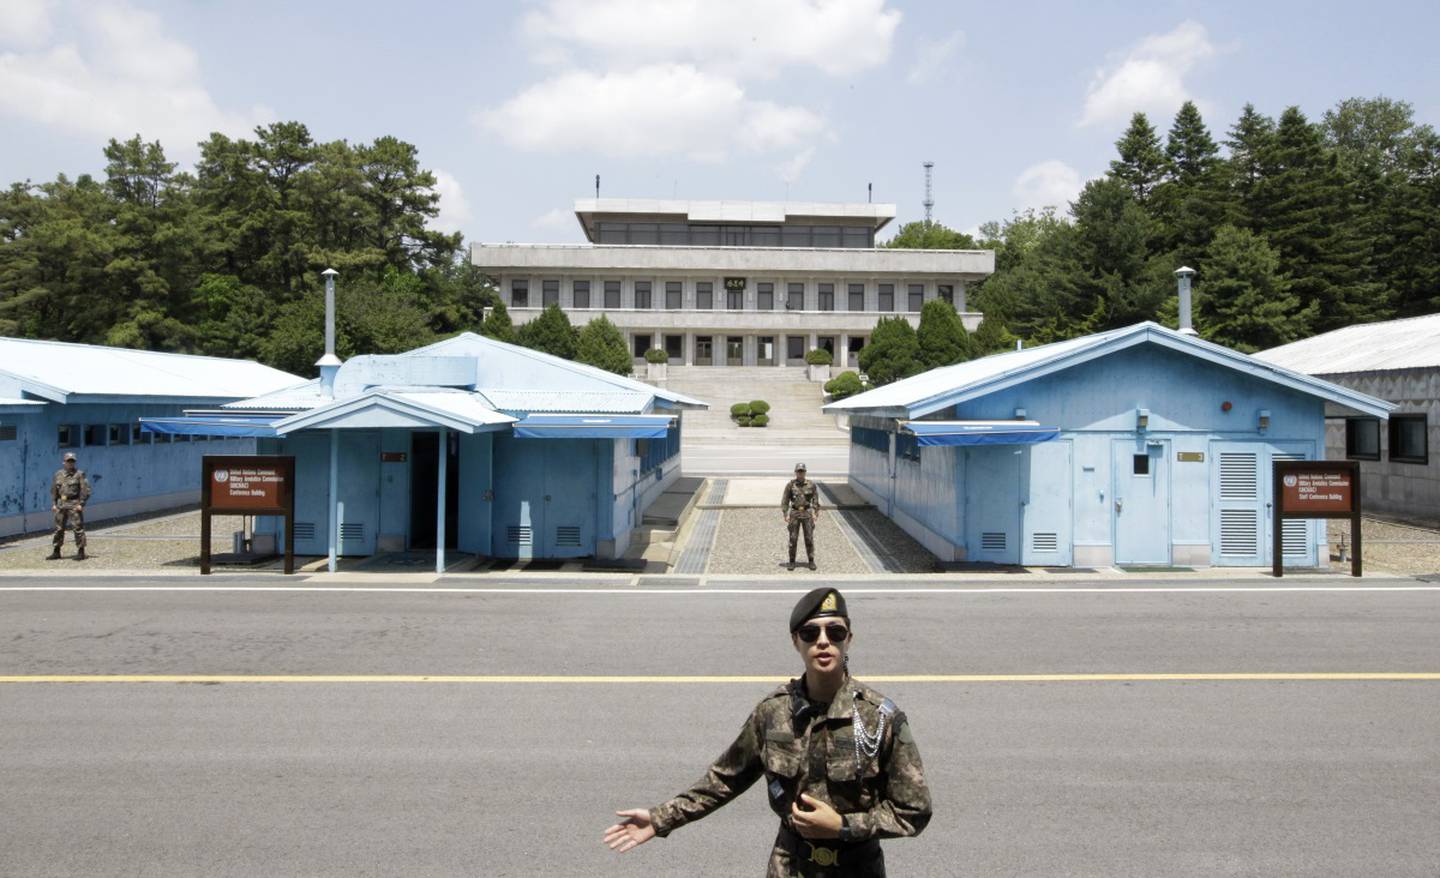 A South Korean soldier gestures during a press tour at the Panmunjom in the Demilitarized Zone, South Korea.